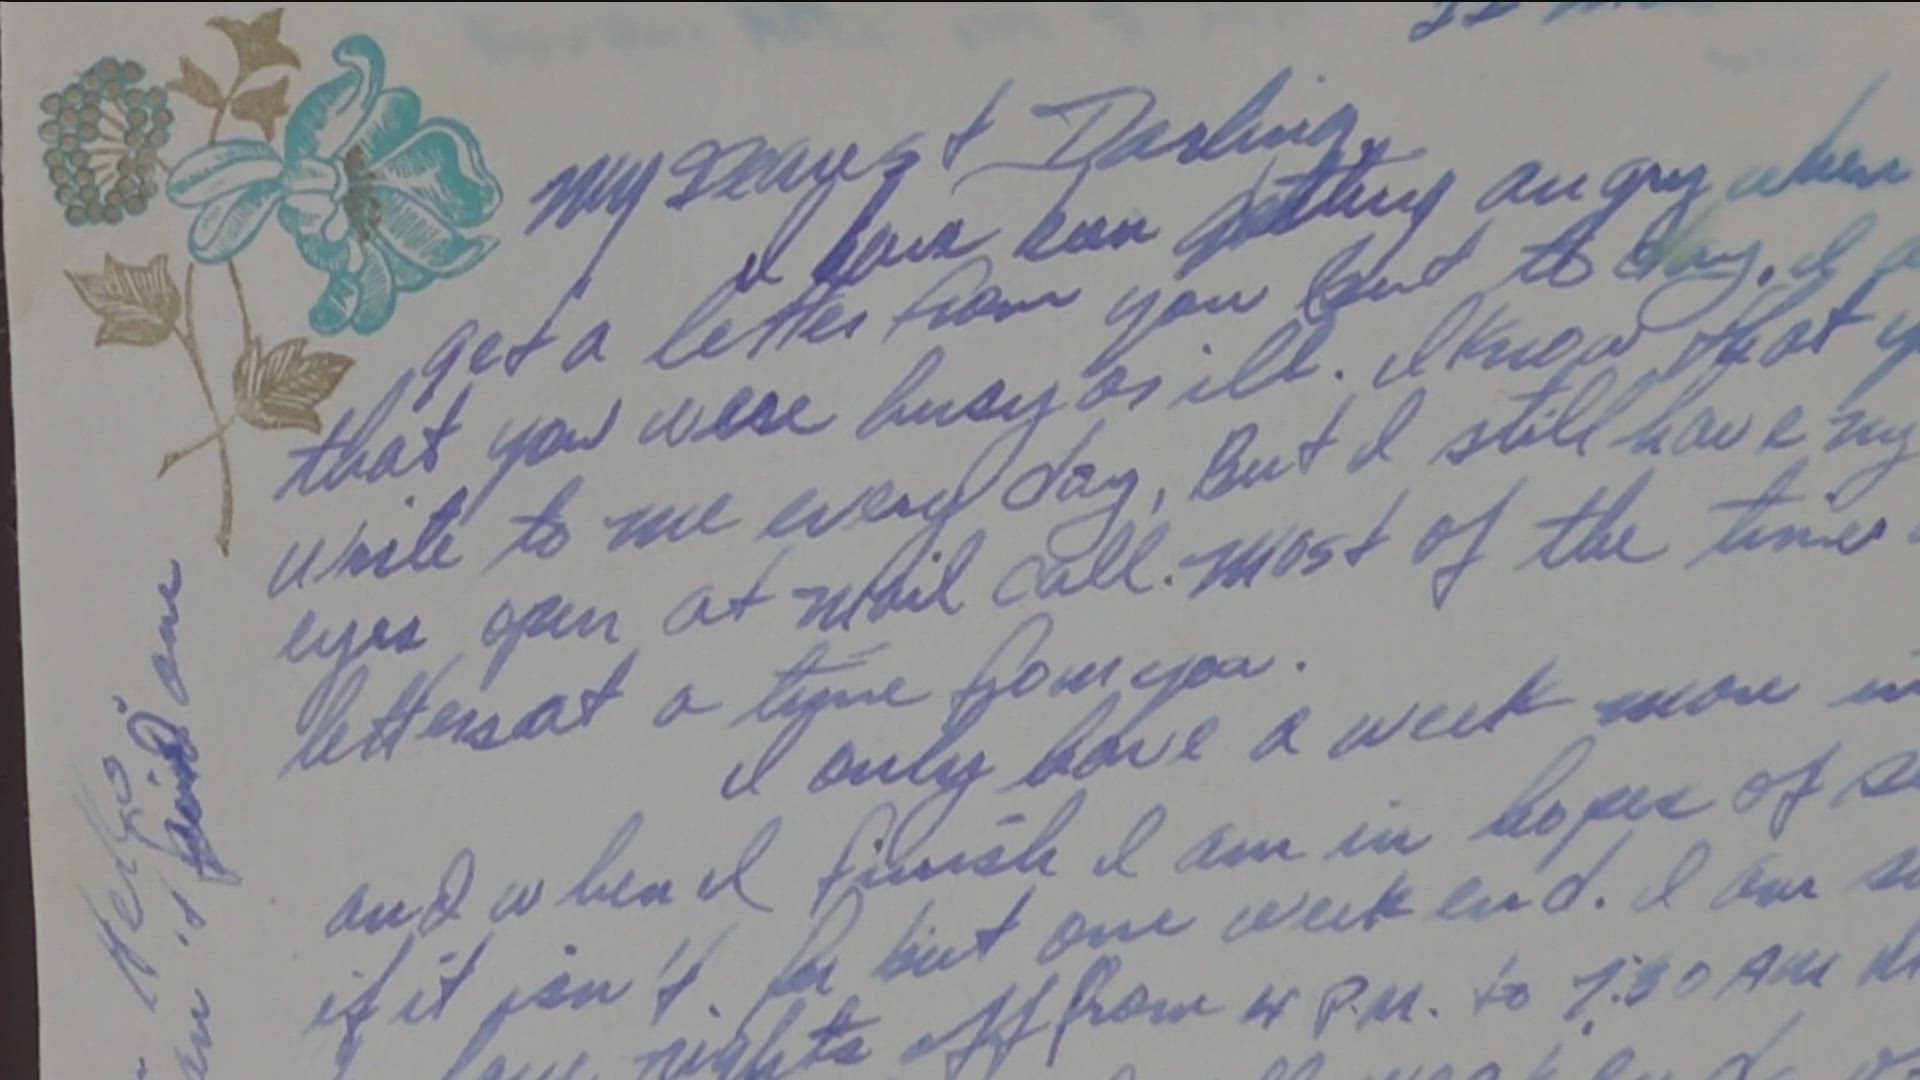 In the boxes of keepsakes, are love letters that Idella White painstakingly saved since 1948.